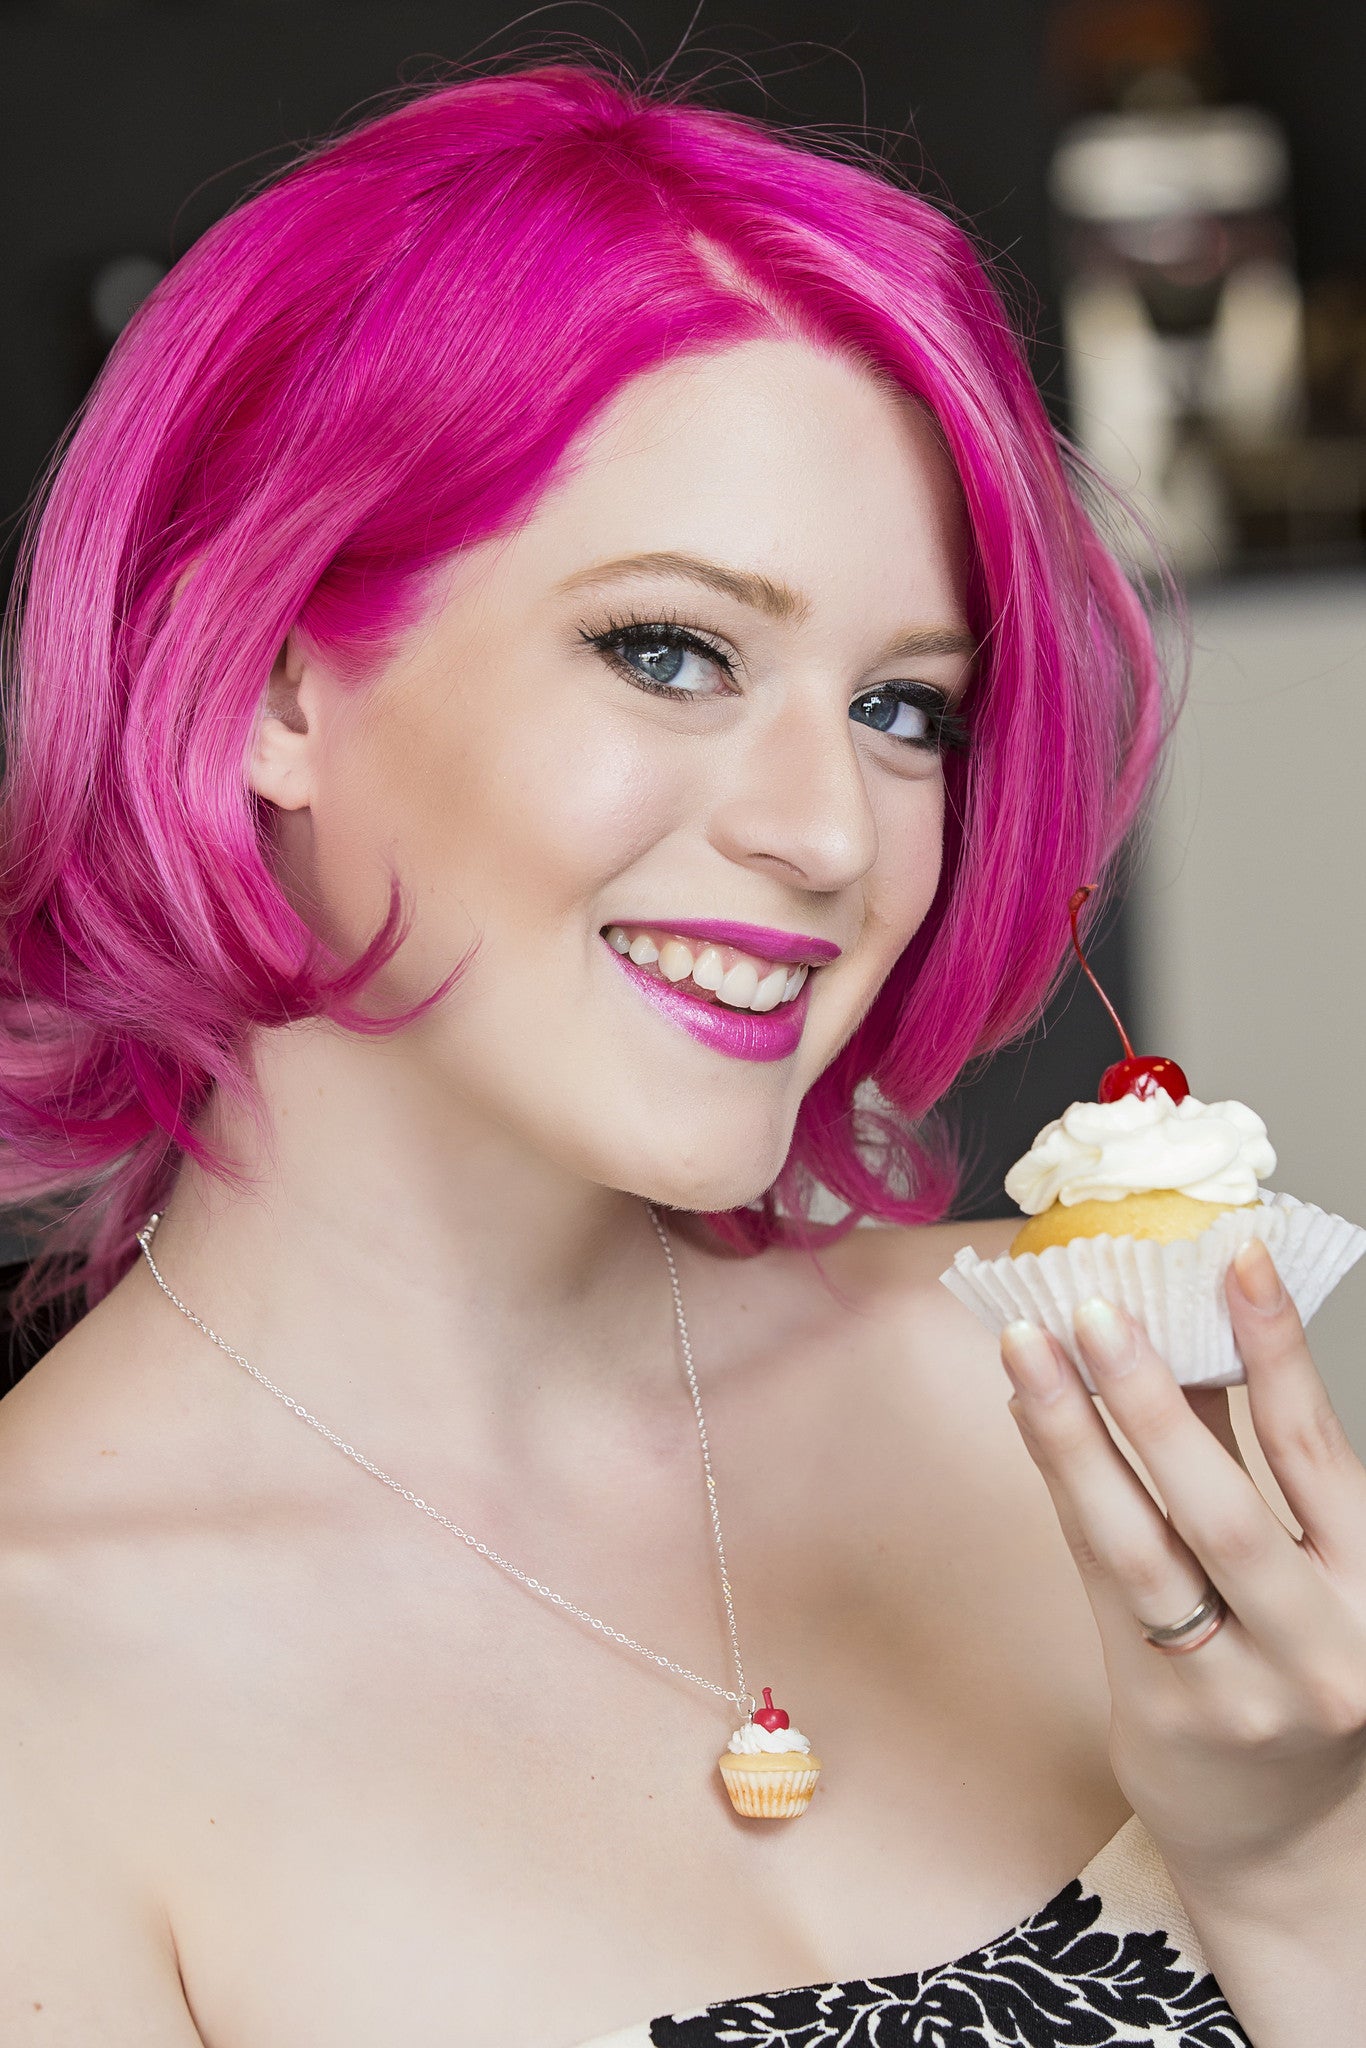 Vanilla Bean Cupcake Necklace - Jillicious charms and accessories